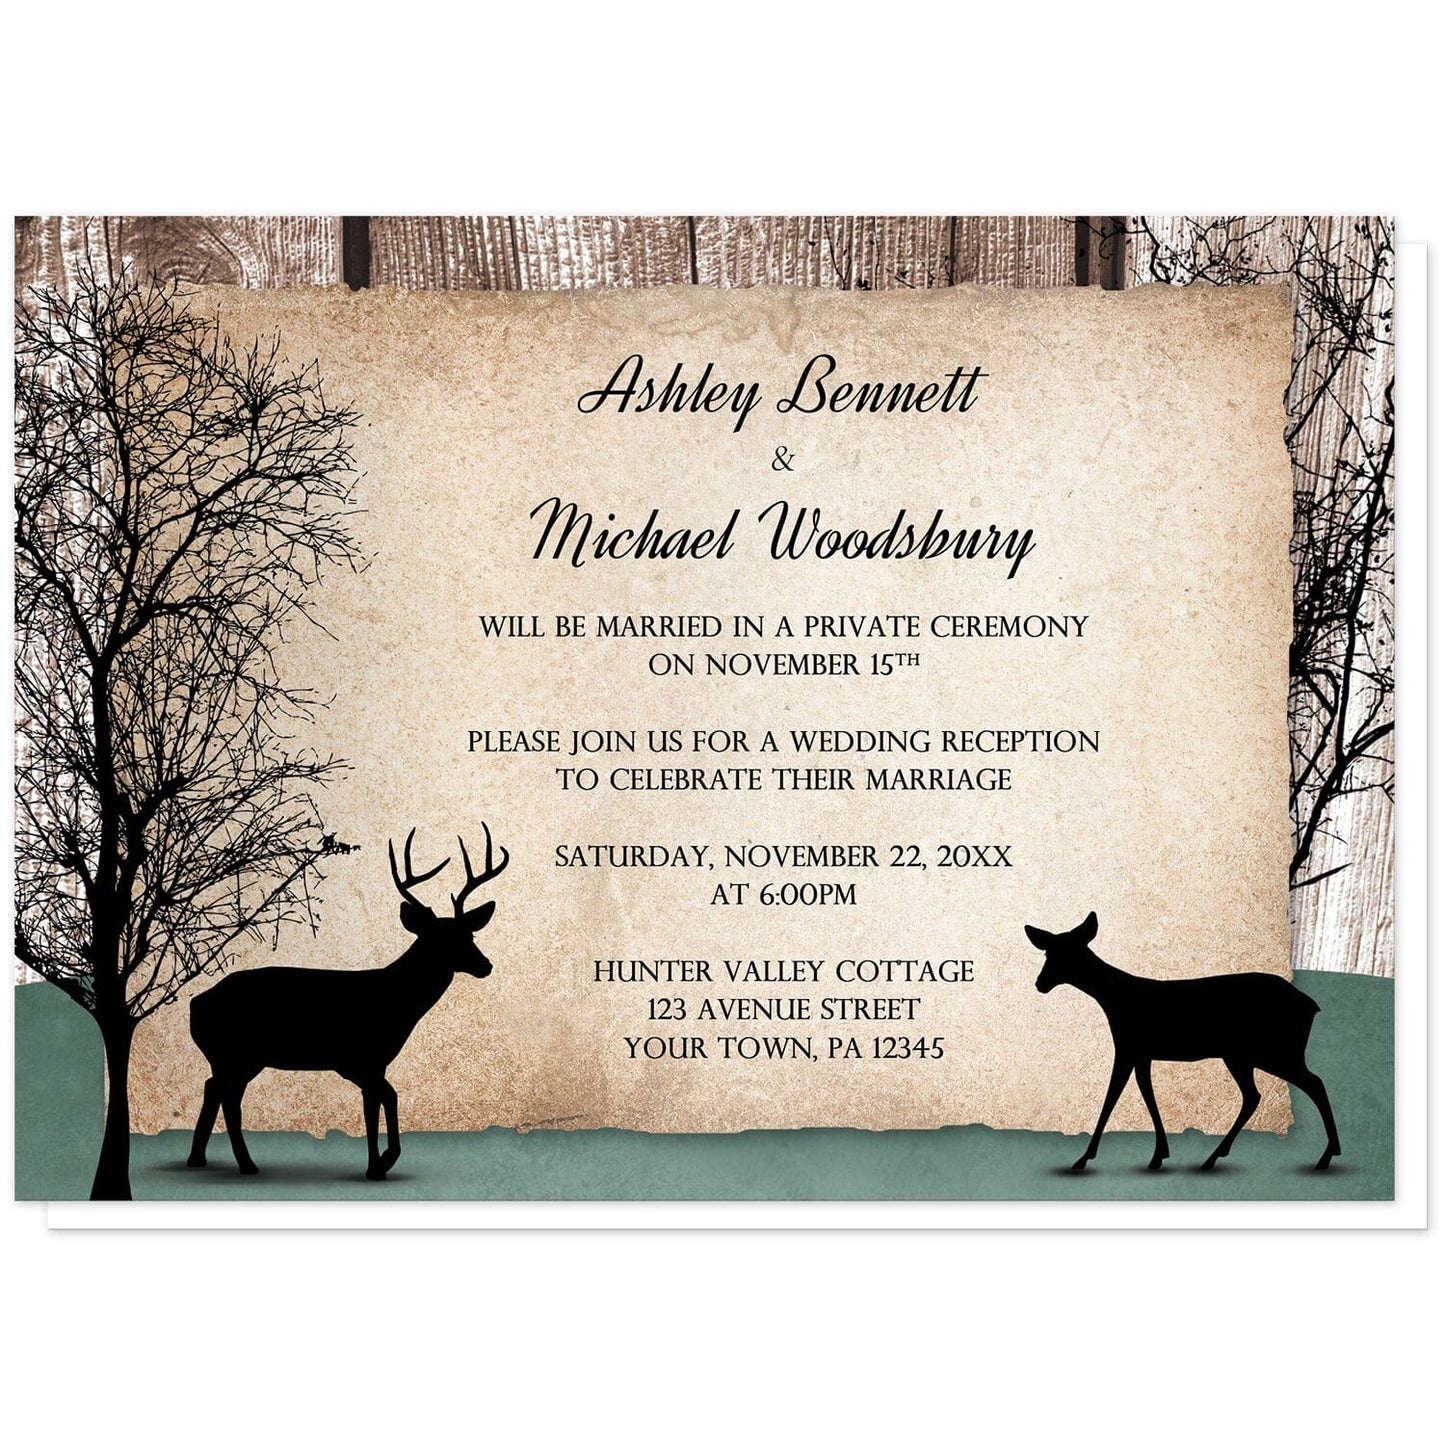 Rustic Woodsy Deer Reception Only Invitations at Artistically Invited. Rustic woodsy deer reception only invitations designed with silhouettes of a buck deer with antlers, a doe, and winter trees over a wood brown background and a faded hunter green design along the bottom. Your personalized post-wedding reception details are custom printed in black over a tattered rustic paper illustration between the deer.